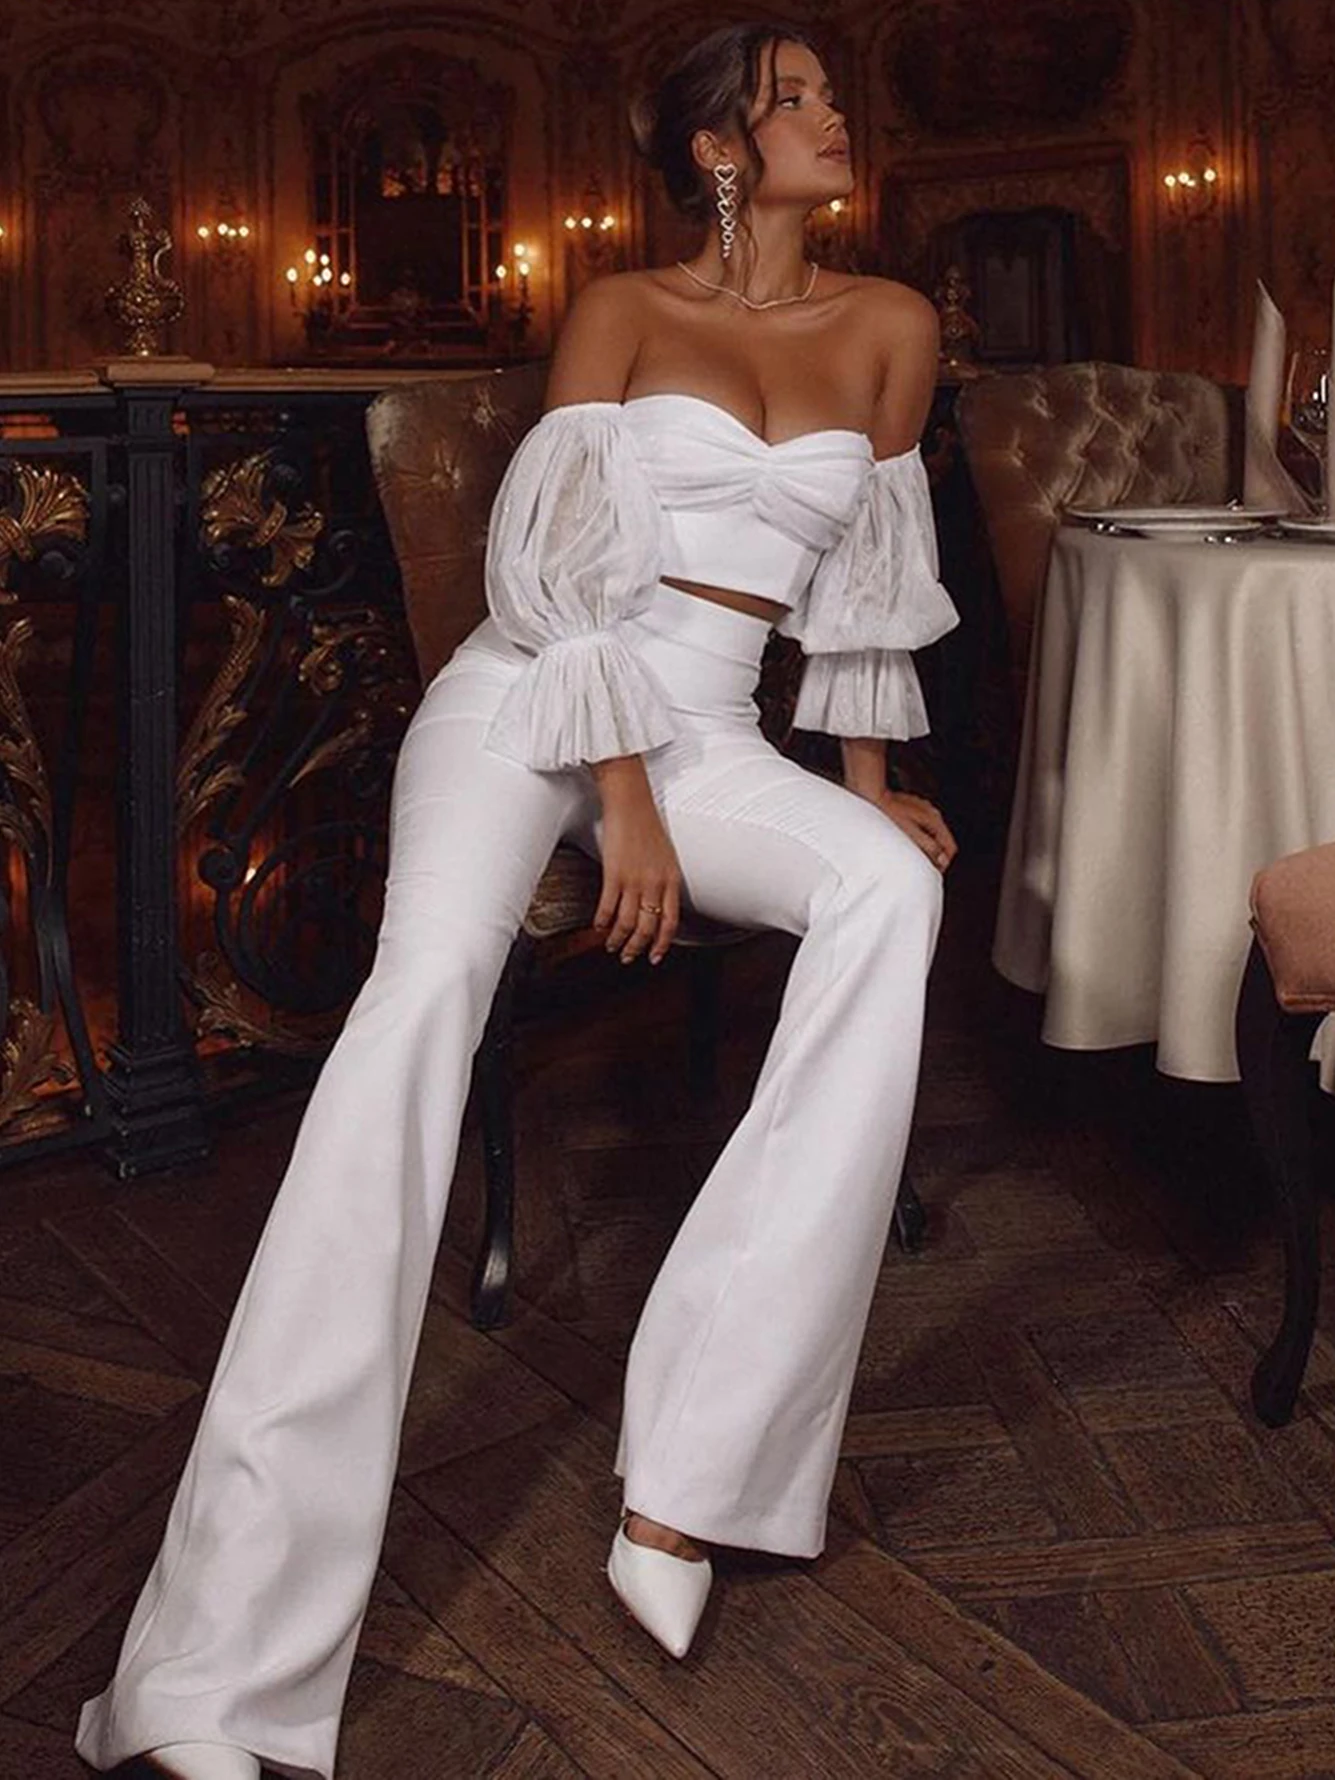 2022 Spring New Fashion White Pants Two Piece Set Women Puff Sleeve Crop Top & High Waist Flared Pants 2 Piece Suit Party Outfit enlarge